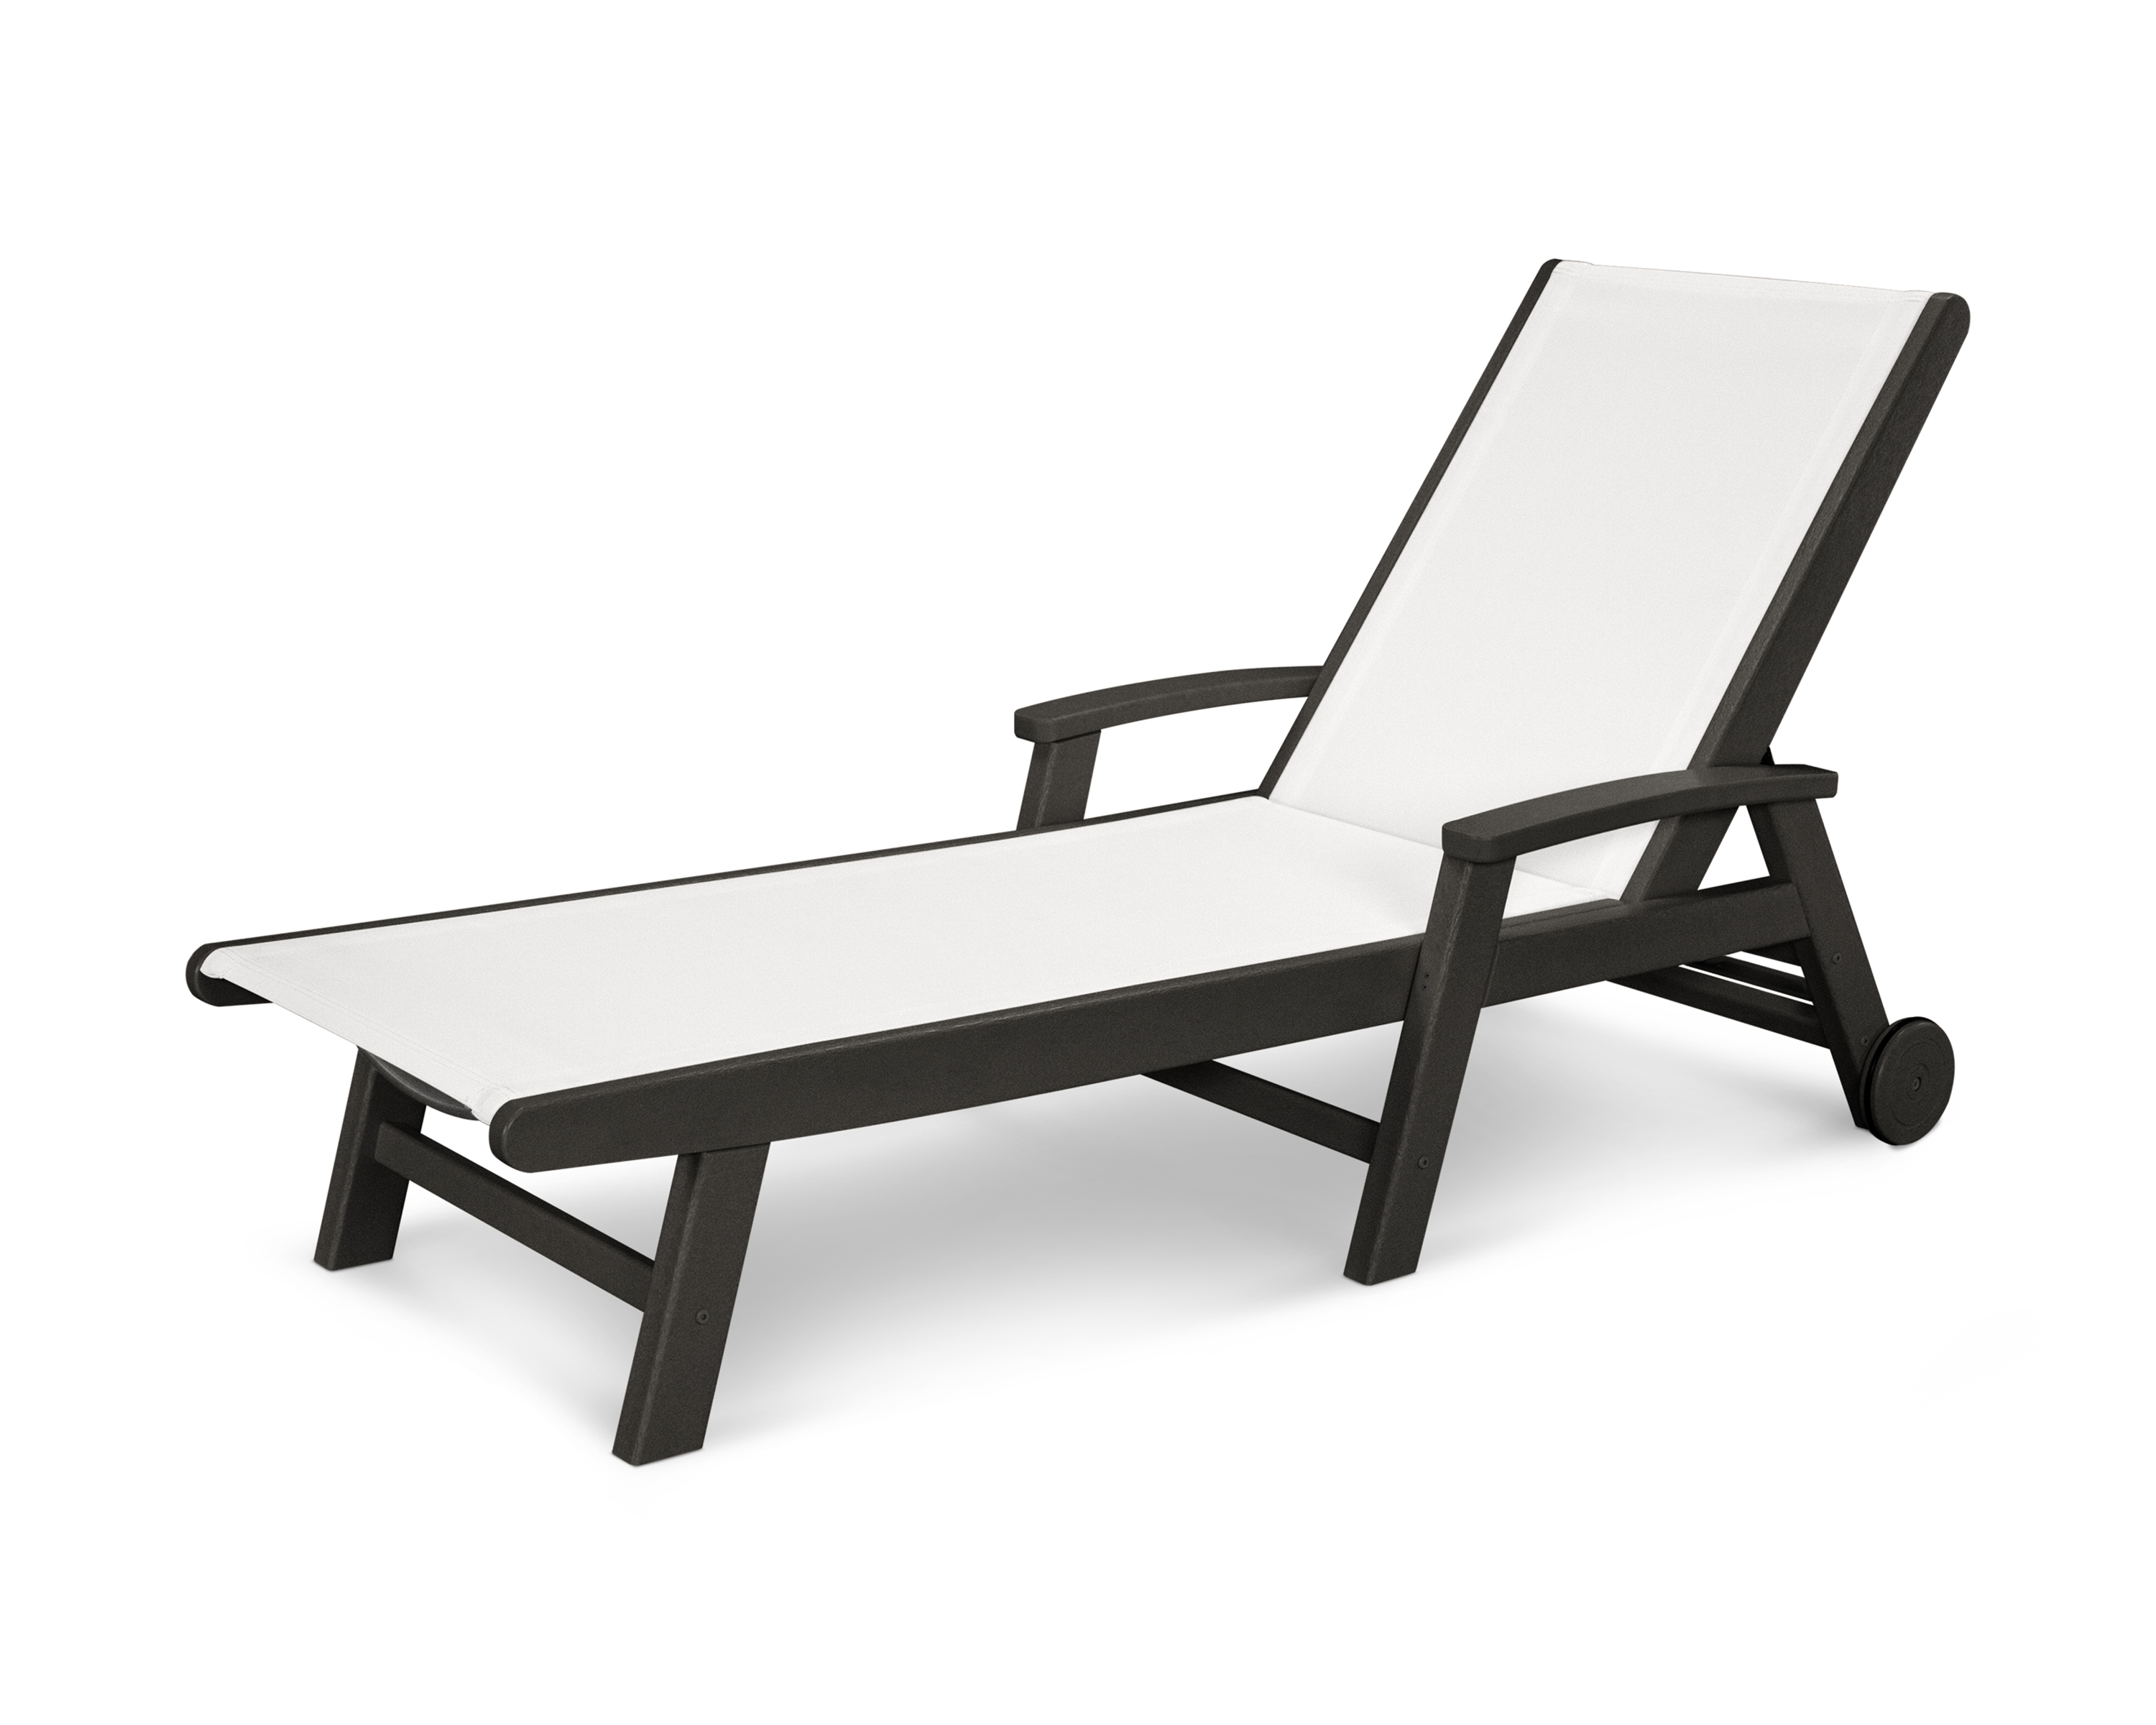 coastal chaise with wheels in black / white sling thumbnail image